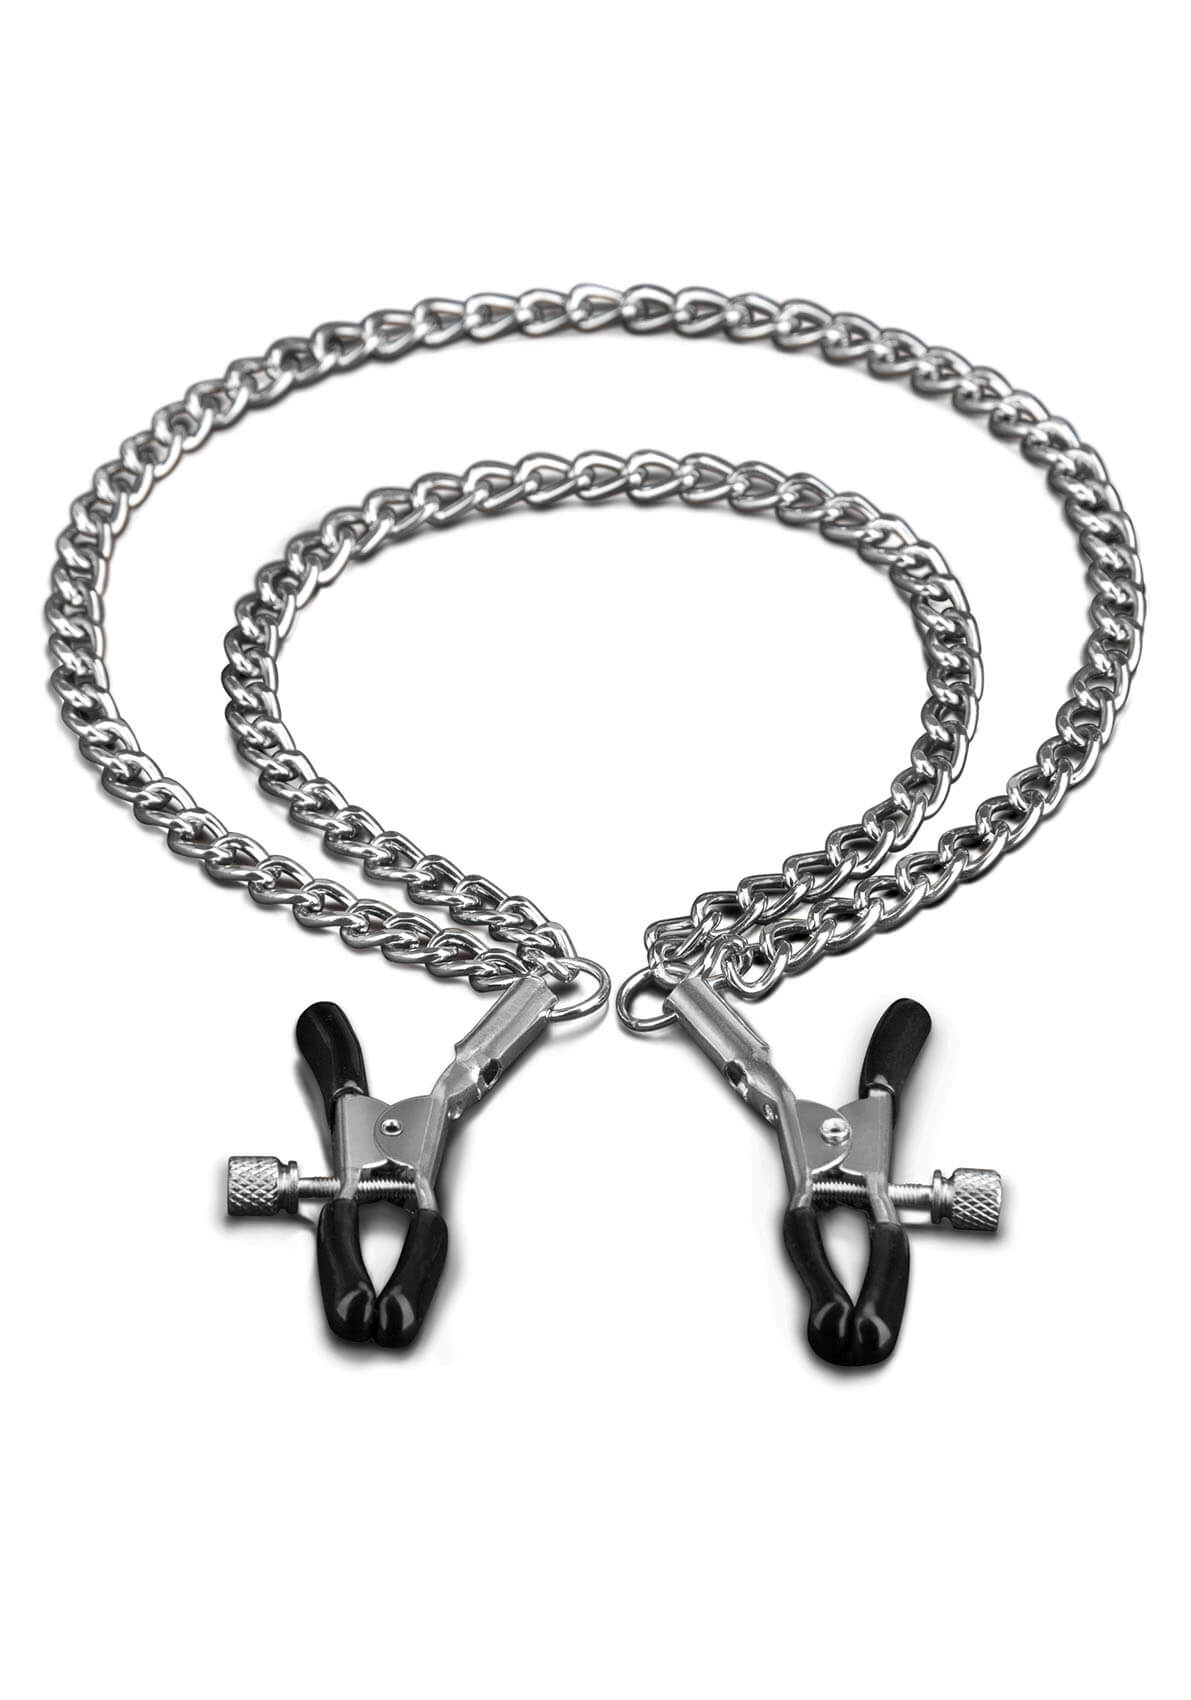 Beginner’s Guide to Nipple Clamps